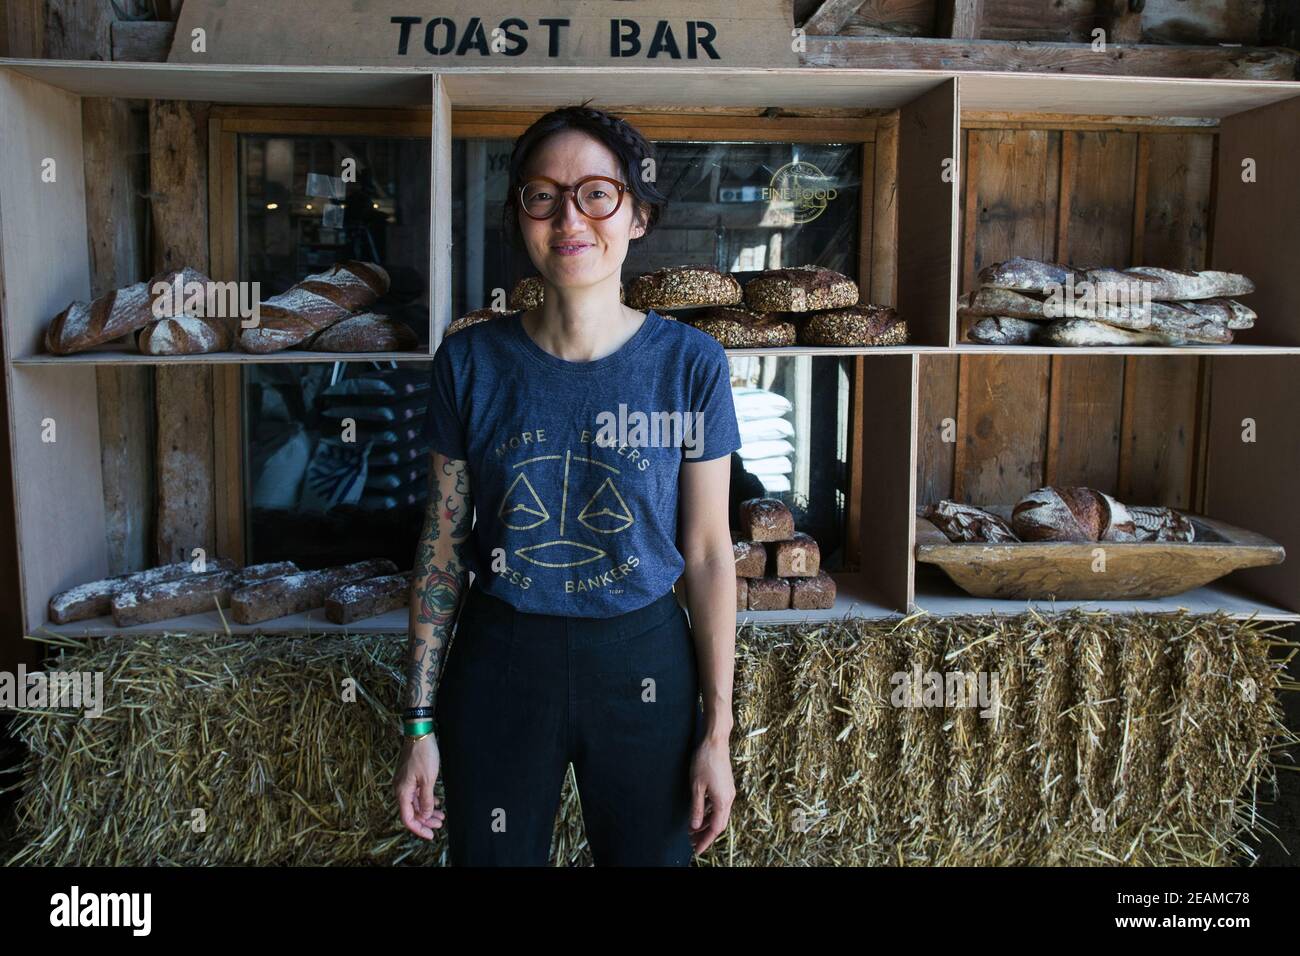 GREAT BRITAIN / England / Hertfordshire /Woman with t-shirt ' More Bakers Less Bankers standing in front artisan bread . Stock Photo